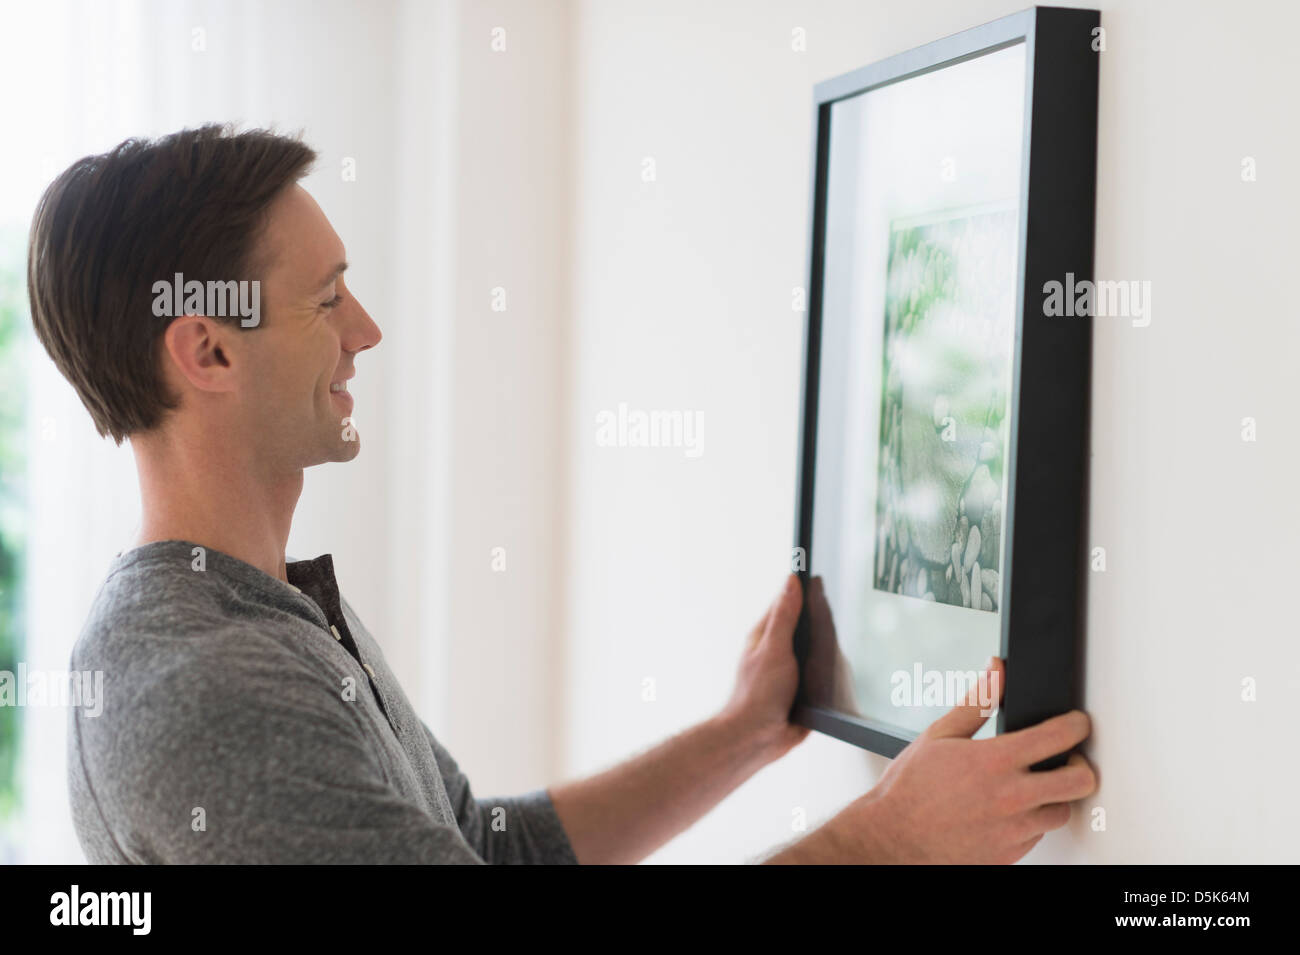 Man hanging picture on wall Stock Photo